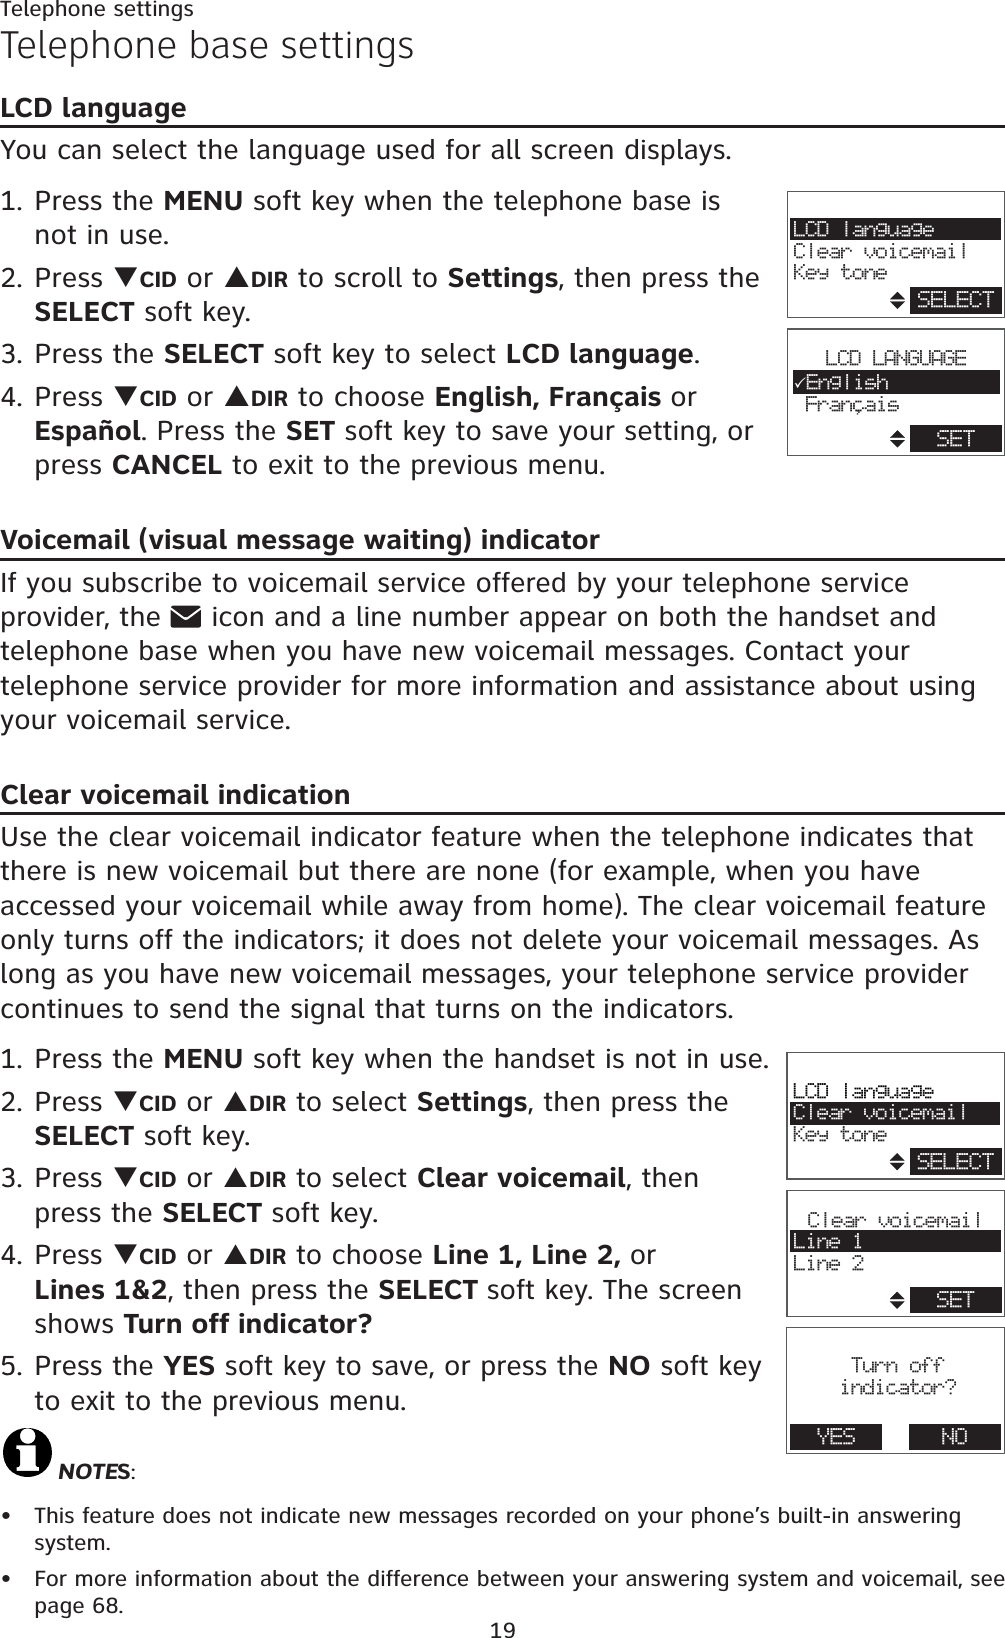 19Telephone settingsTelephone base settingsLCD languageYou can select the language used for all screen displays.1. Press the MENU soft key when the telephone base is not in use.2. Press TCID or SDIR to scroll to Settings, then press the SELECT soft key.3. Press the SELECT soft key to select LCD language.4. Press TCID or SDIR to choose English, Français orEspañol. Press the SET soft key to save your setting, or press CANCEL to exit to the previous menu.Voicemail (visual message waiting) indicatorIf you subscribe to voicemail service offered by your telephone service provider, the   icon and a line number appear on both the handset and telephone base when you have new voicemail messages. Contact your telephone service provider for more information and assistance about using your voicemail service. Clear voicemail indicationUse the clear voicemail indicator feature when the telephone indicates that there is new voicemail but there are none (for example, when you have accessed your voicemail while away from home). The clear voicemail feature only turns off the indicators; it does not delete your voicemail messages. As long as you have new voicemail messages, your telephone service provider continues to send the signal that turns on the indicators.1. Press the MENU soft key when the handset is not in use.2. Press TCID or SDIR to select Settings, then press the SELECT soft key.3. Press TCID or SDIR to select Clear voicemail, then press the SELECT soft key.4. Press TCID or SDIR to choose Line 1, Line 2, orLines 1&amp;2, then press the SELECT soft key. The screen shows Turn off indicator?5. Press the YES soft key to save, or press the NO soft key to exit to the previous menu.NOTES:This feature does not indicate new messages recorded on your phone’s built-in answering system.For more information about the difference between your answering system and voicemail, see page 68.••LCD languageClear voicemailKey toneSELECTClear voicemailLine 1Line 2SETTurn offindicator?YES NOLCD languageClear voicemailKey toneSELECT,LCD LANGUAGE3EnglishFrancaisSET